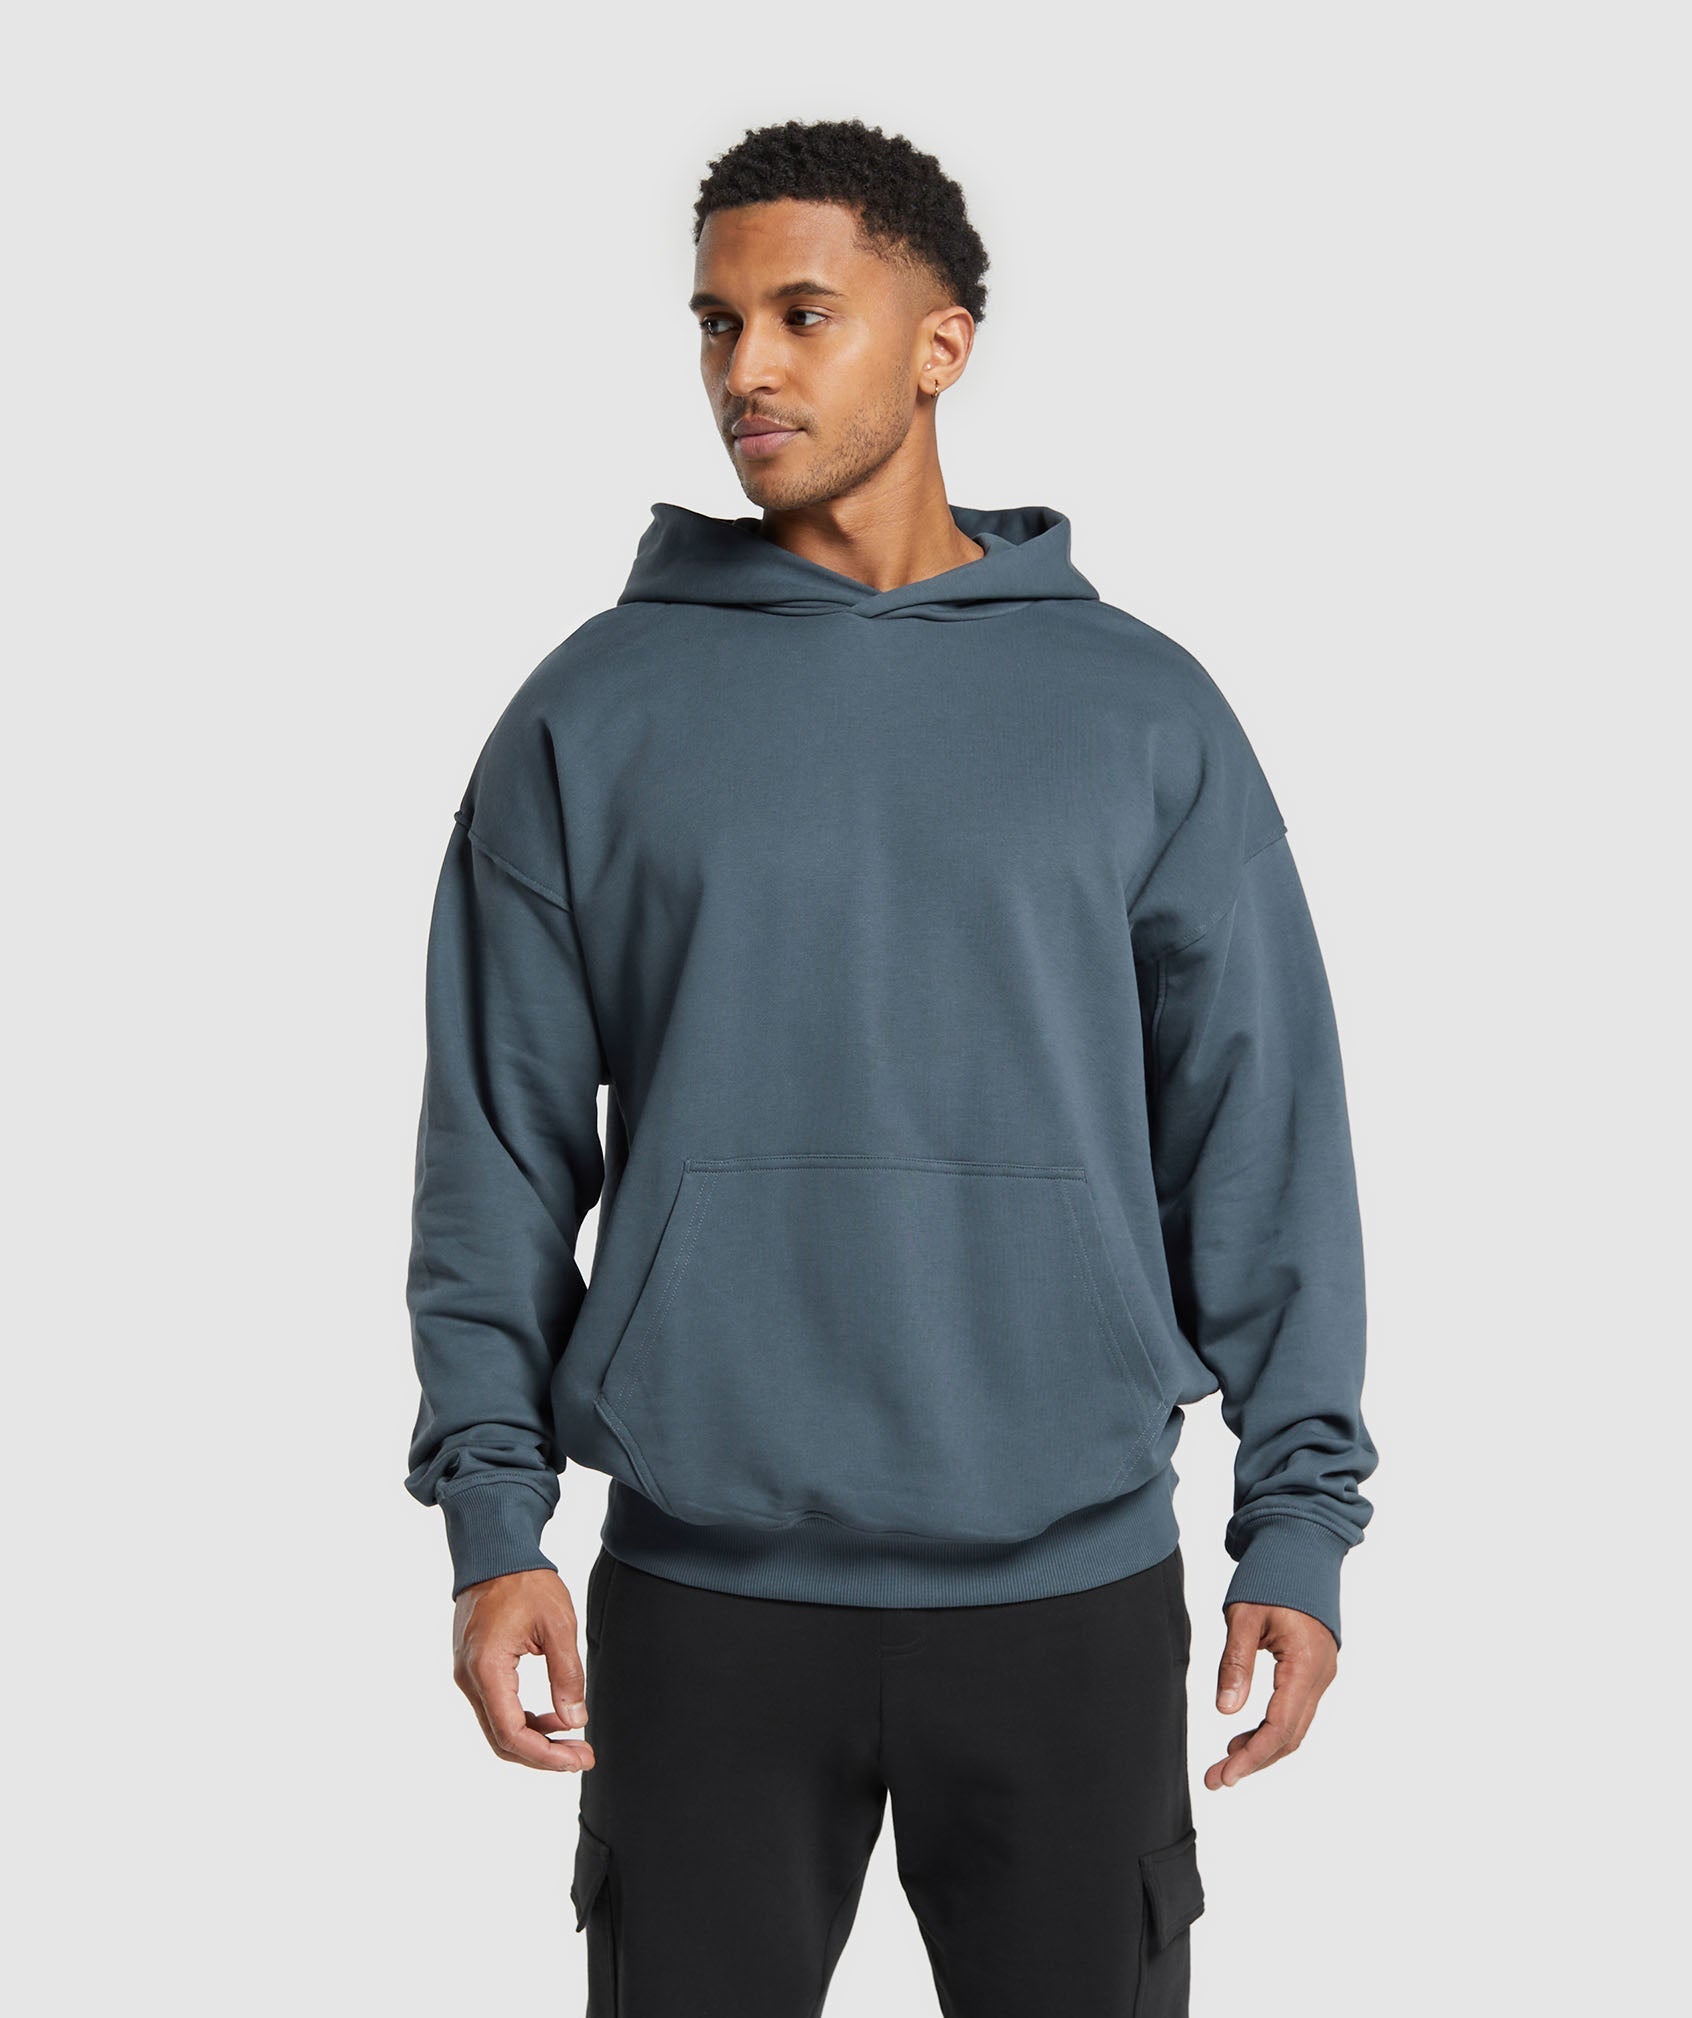 Rest Day Essentials Hoodie in {{variantColor} is out of stock